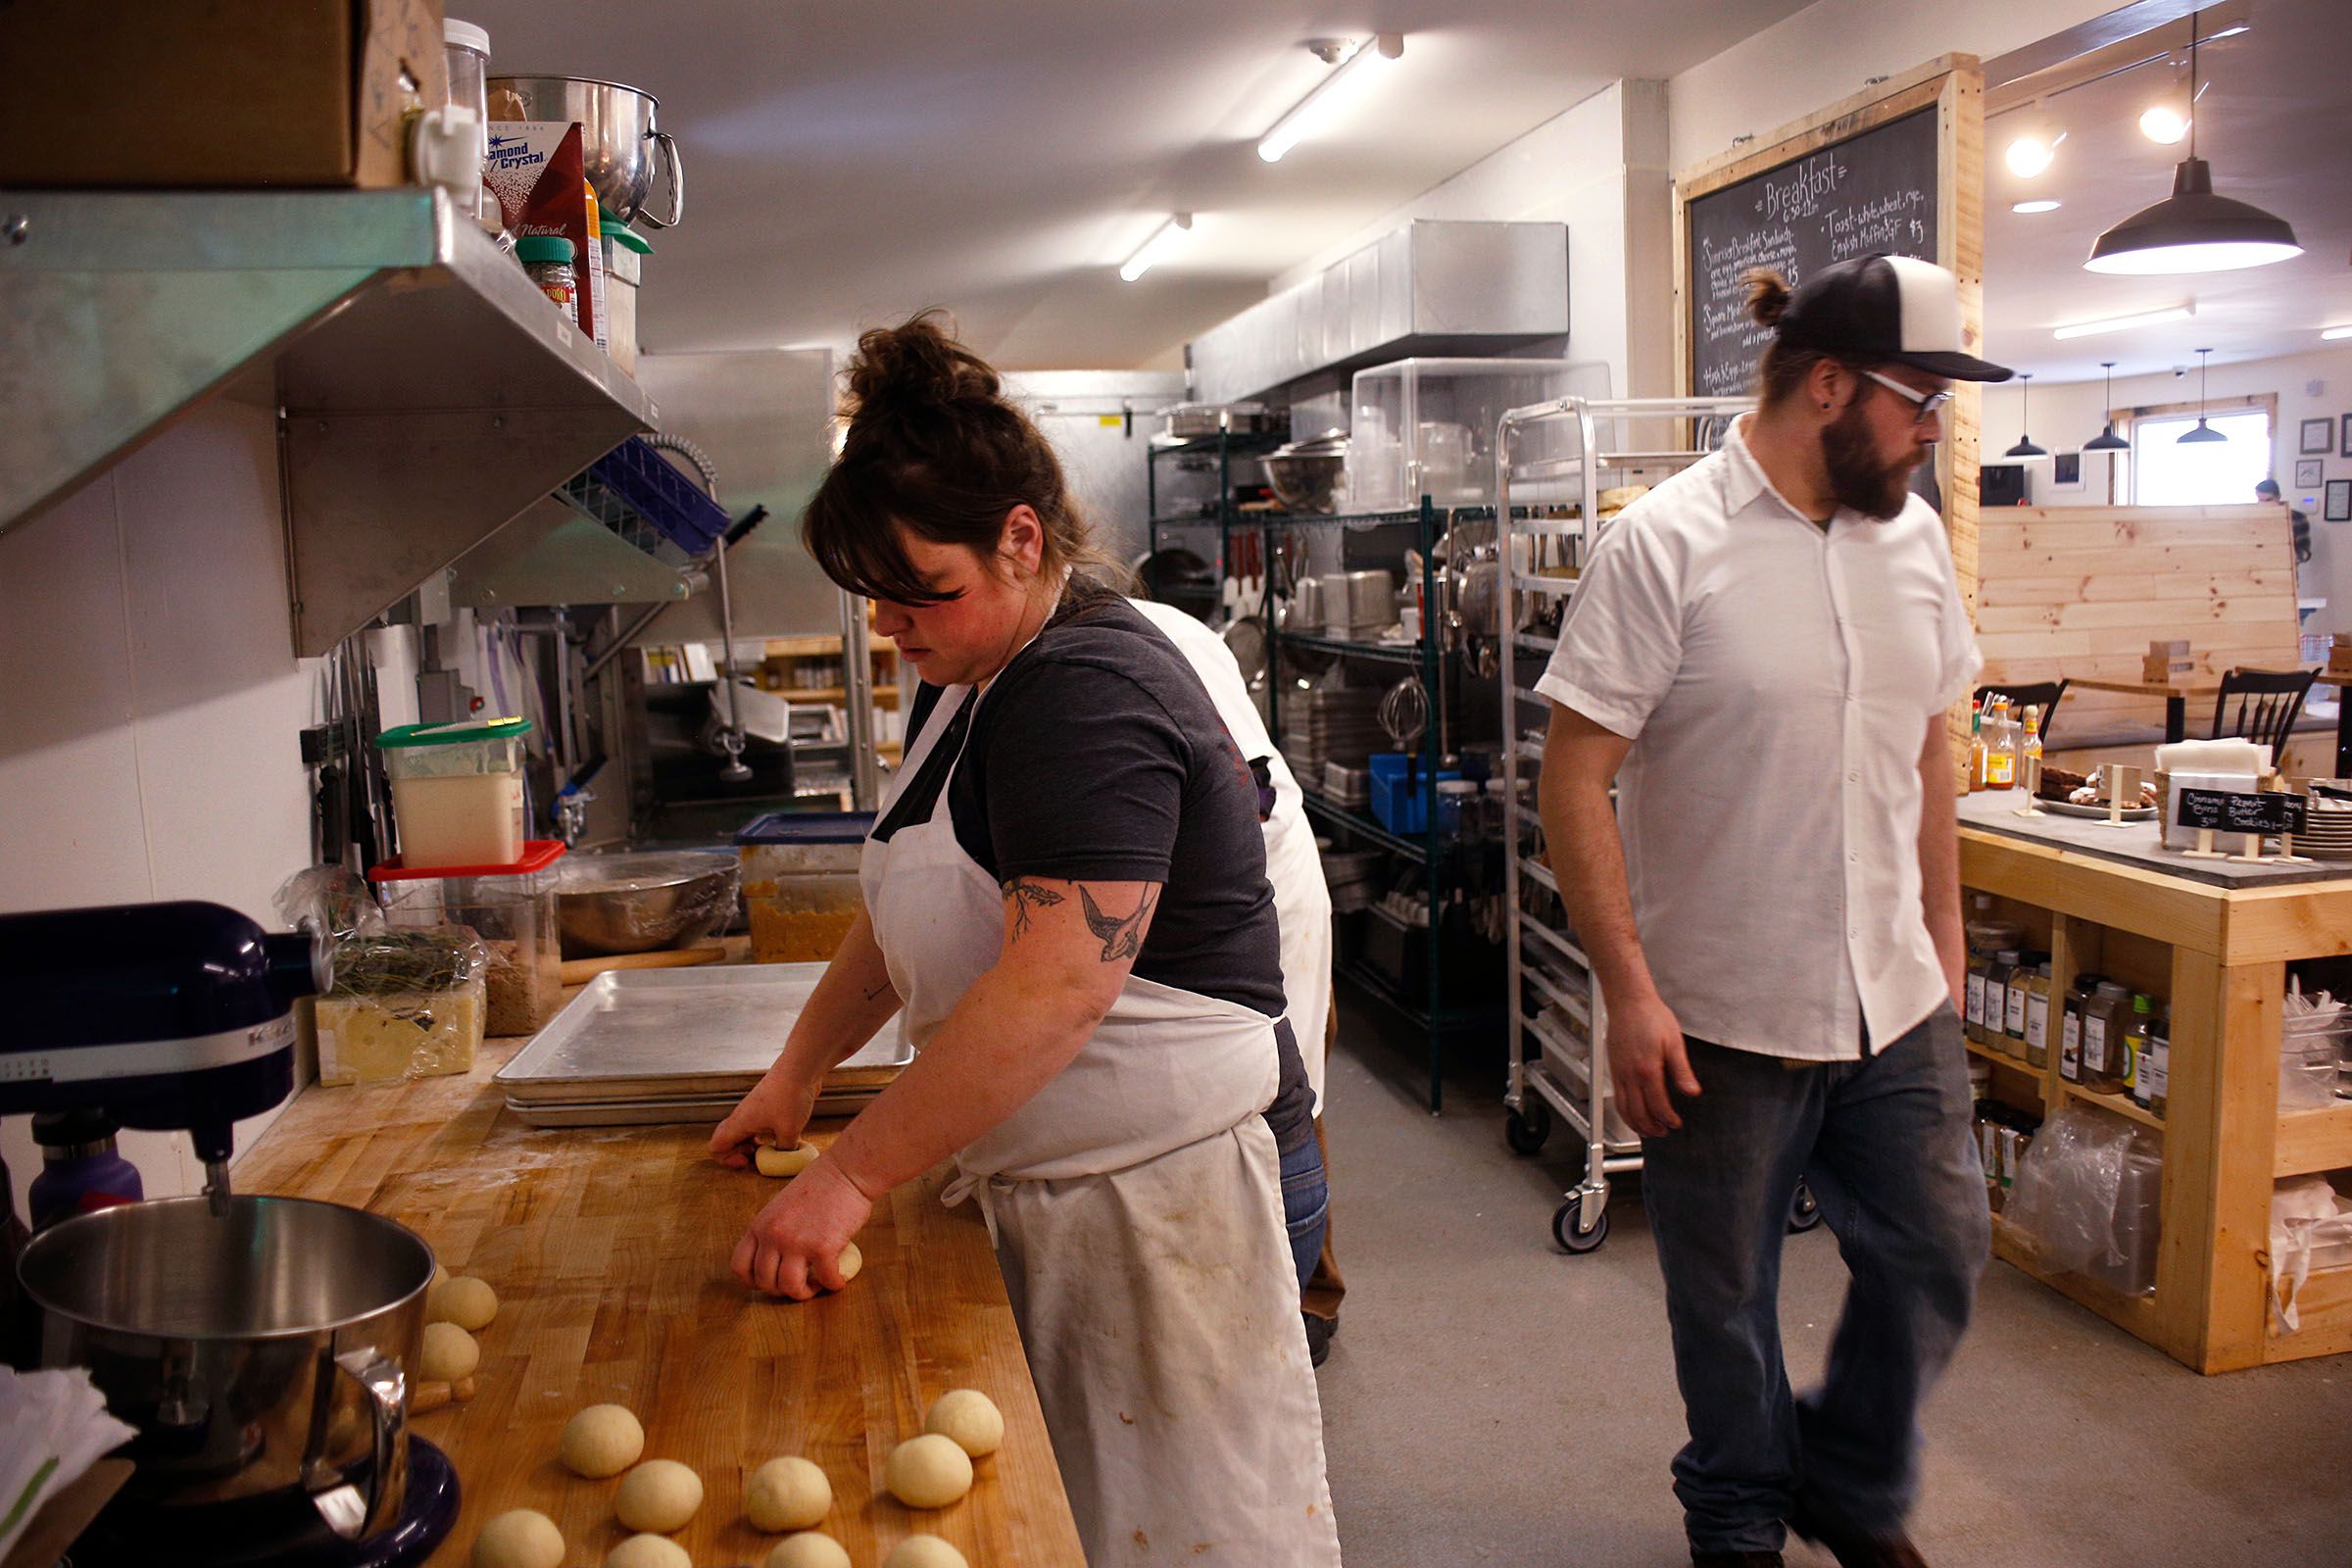 Head baker Laura Horner-Richardson, of Brownsville, makes the day's doughnuts as line cook Forrest Dubuc, of Woodstock, Vt., works at the Brownsville Butcher & Pantry in Brownsville, Vt., on Jan. 17, 2019. (Valley News - Joseph Ressler) Copyright Valley News. May not be reprinted or used online without permission. Send requests to permission@vnews.com.